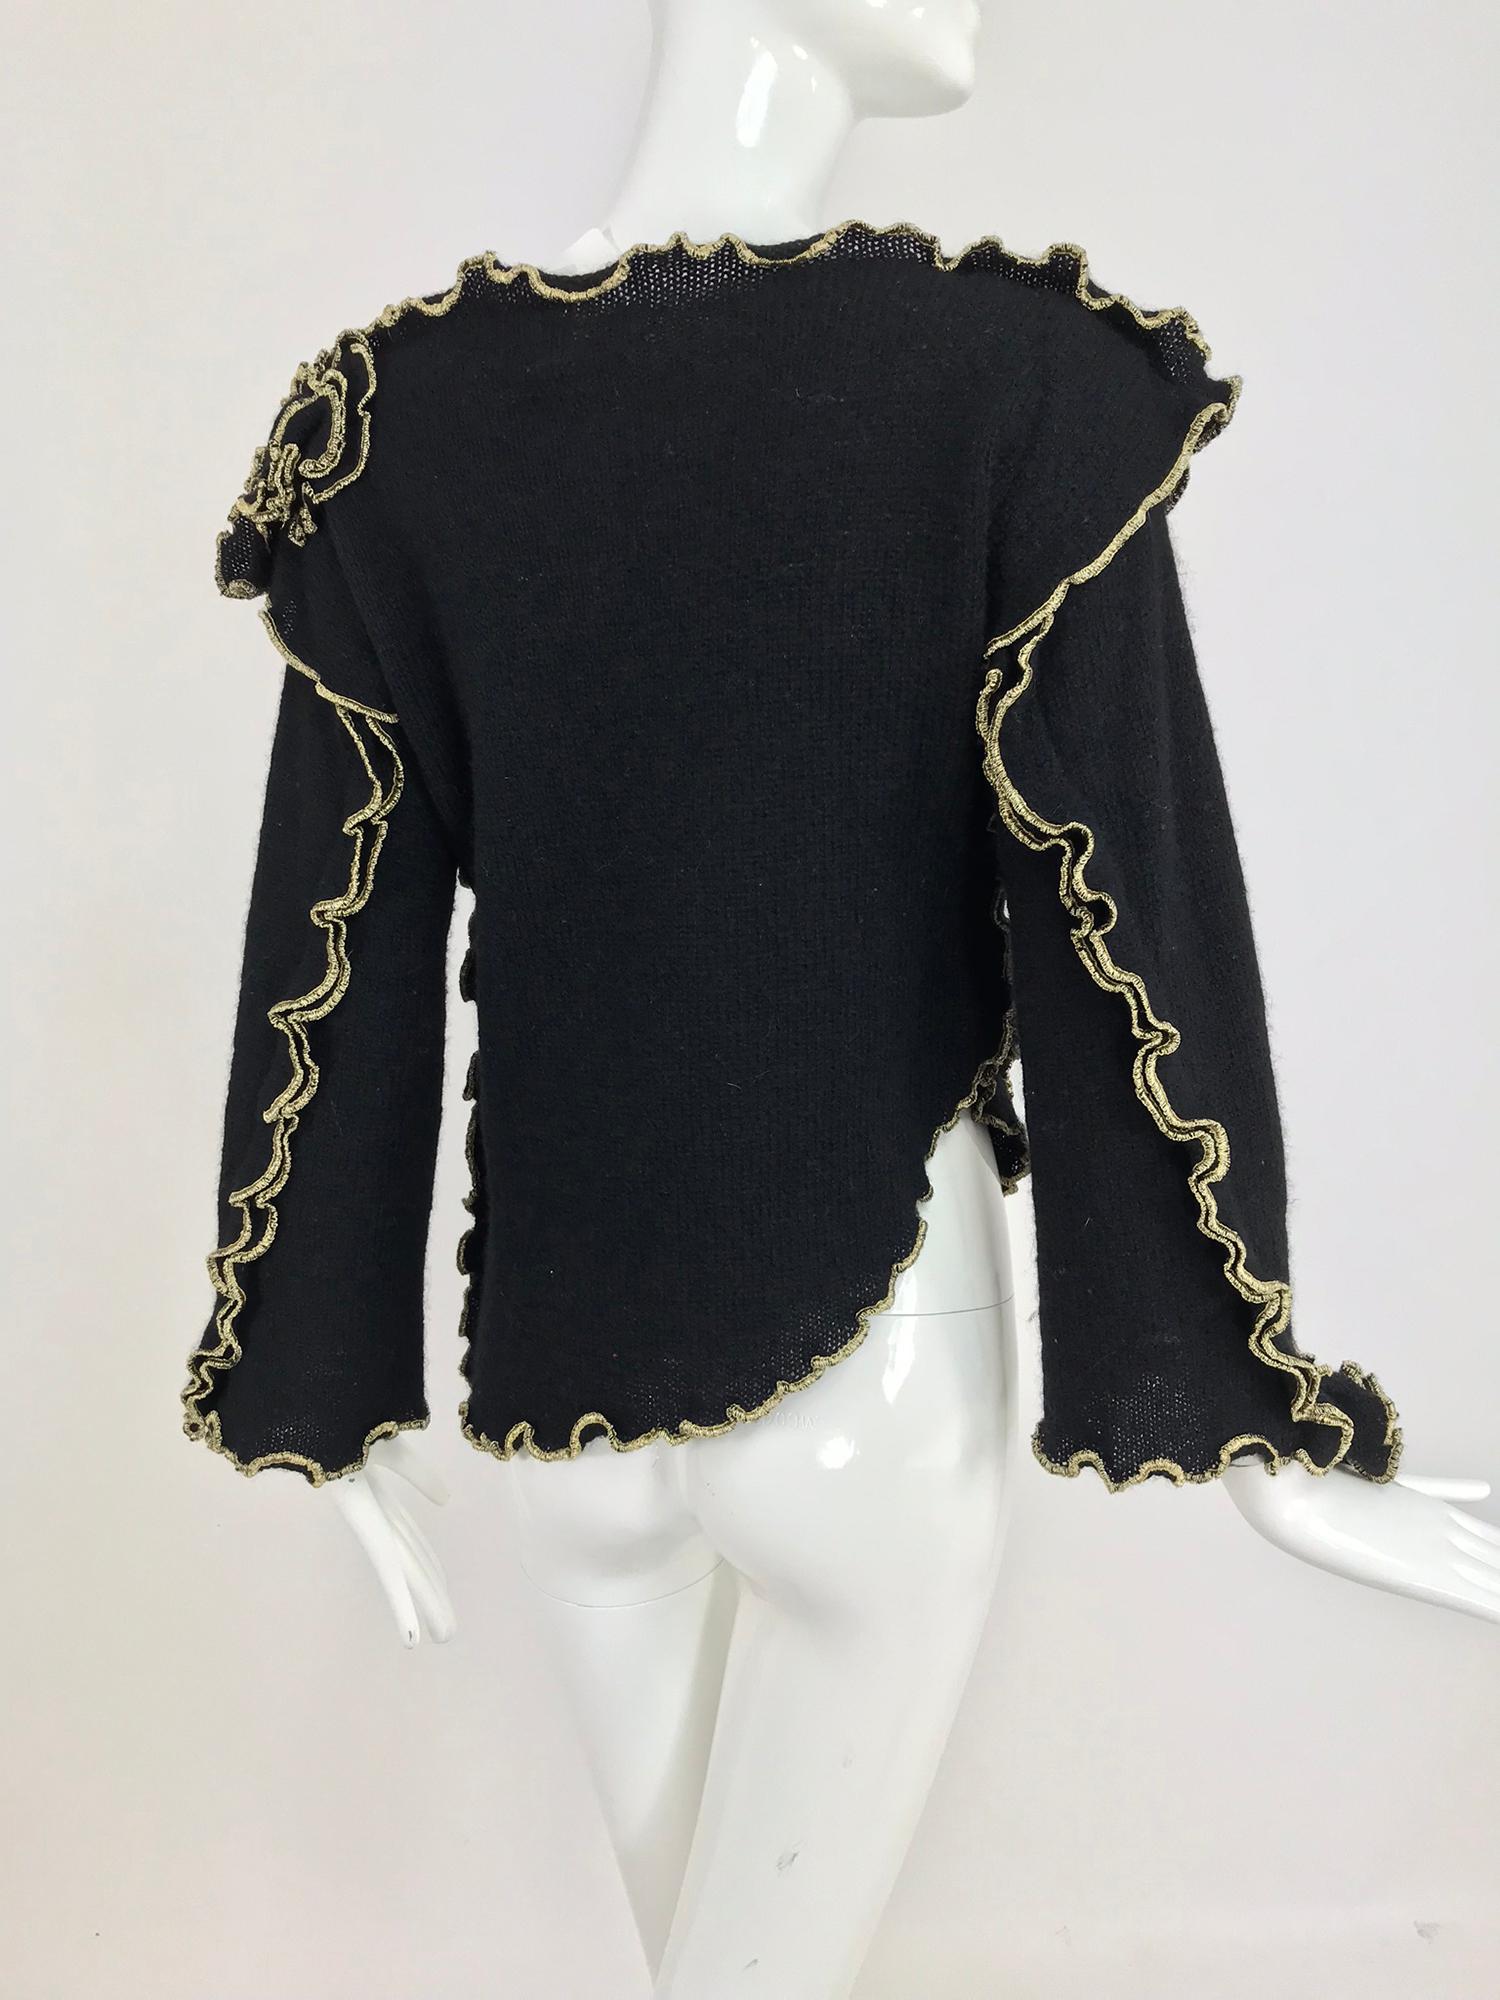 Leigh Westbrook Black Knit Gold Trim Floral Applique Sweater 1980s 7